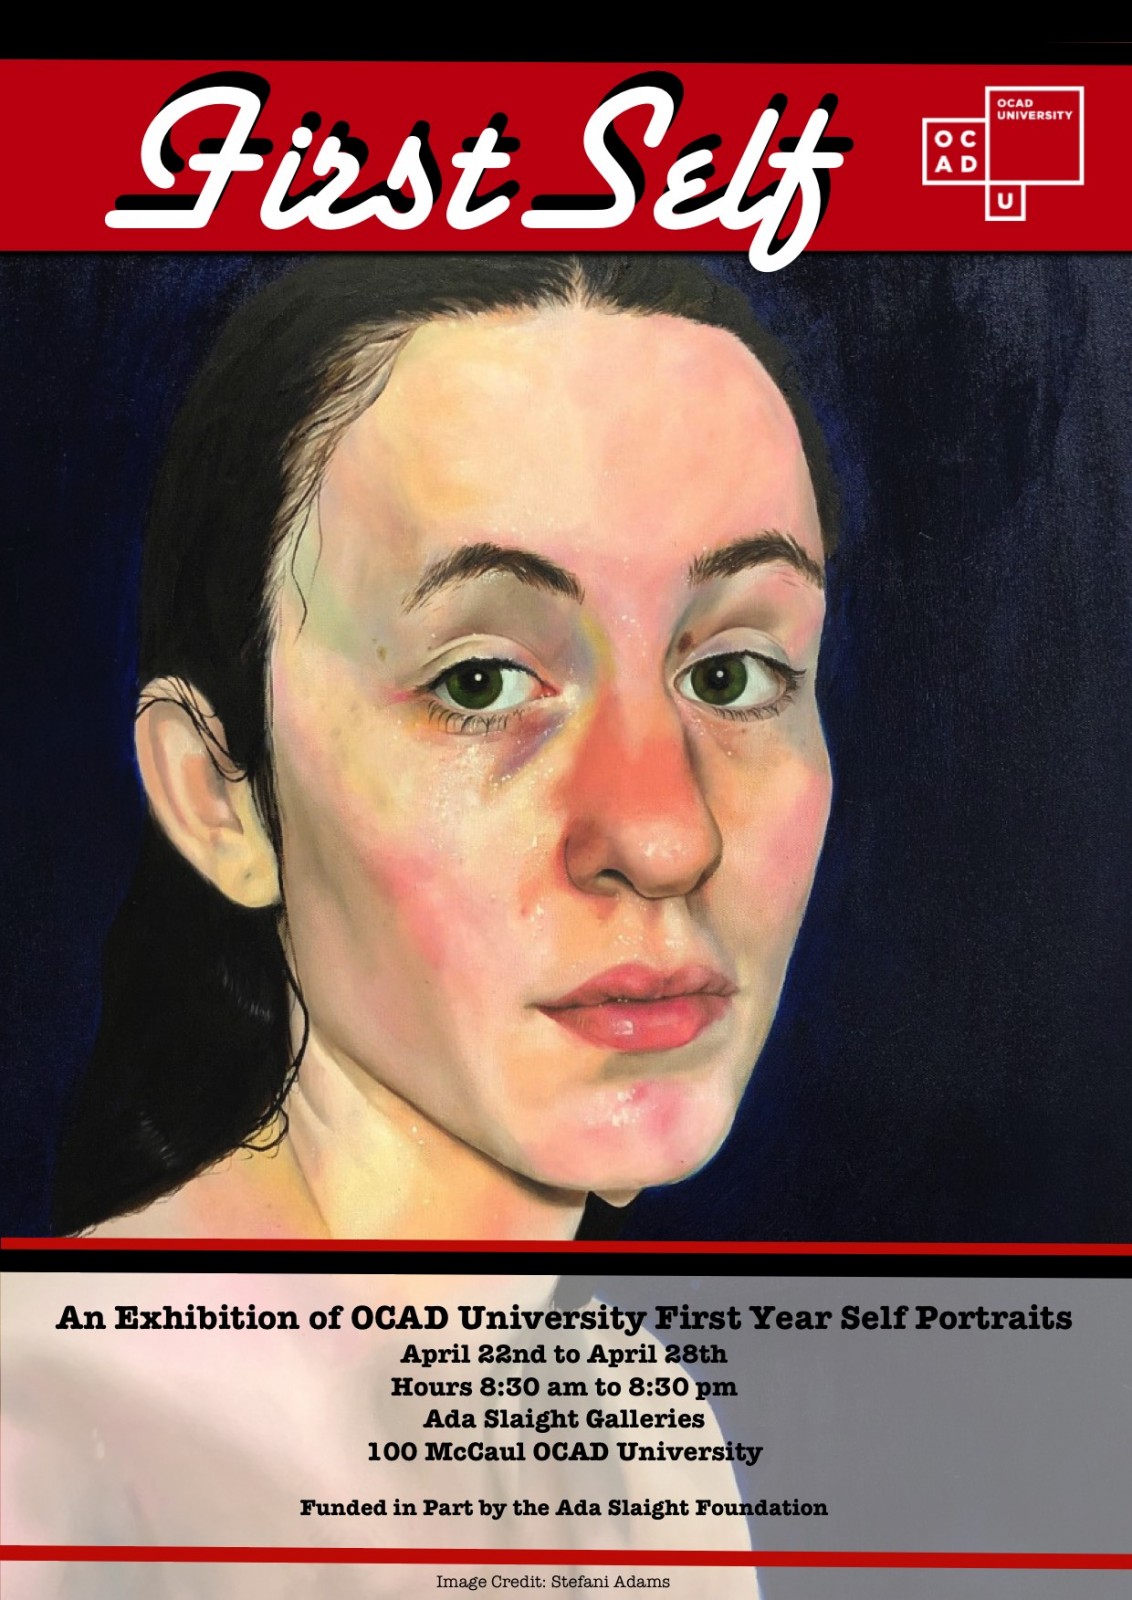 a painted portrait featured on the exhibition poster with text details